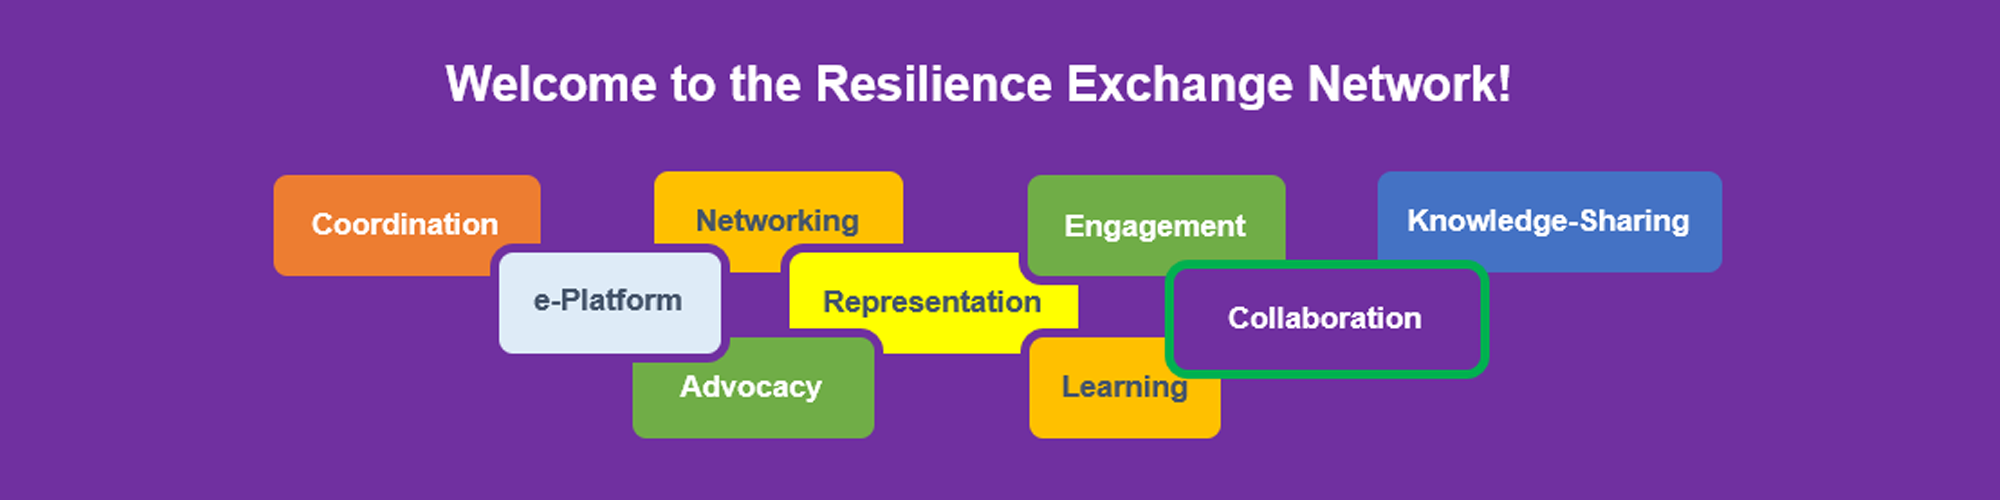 Resilience Exchange Network